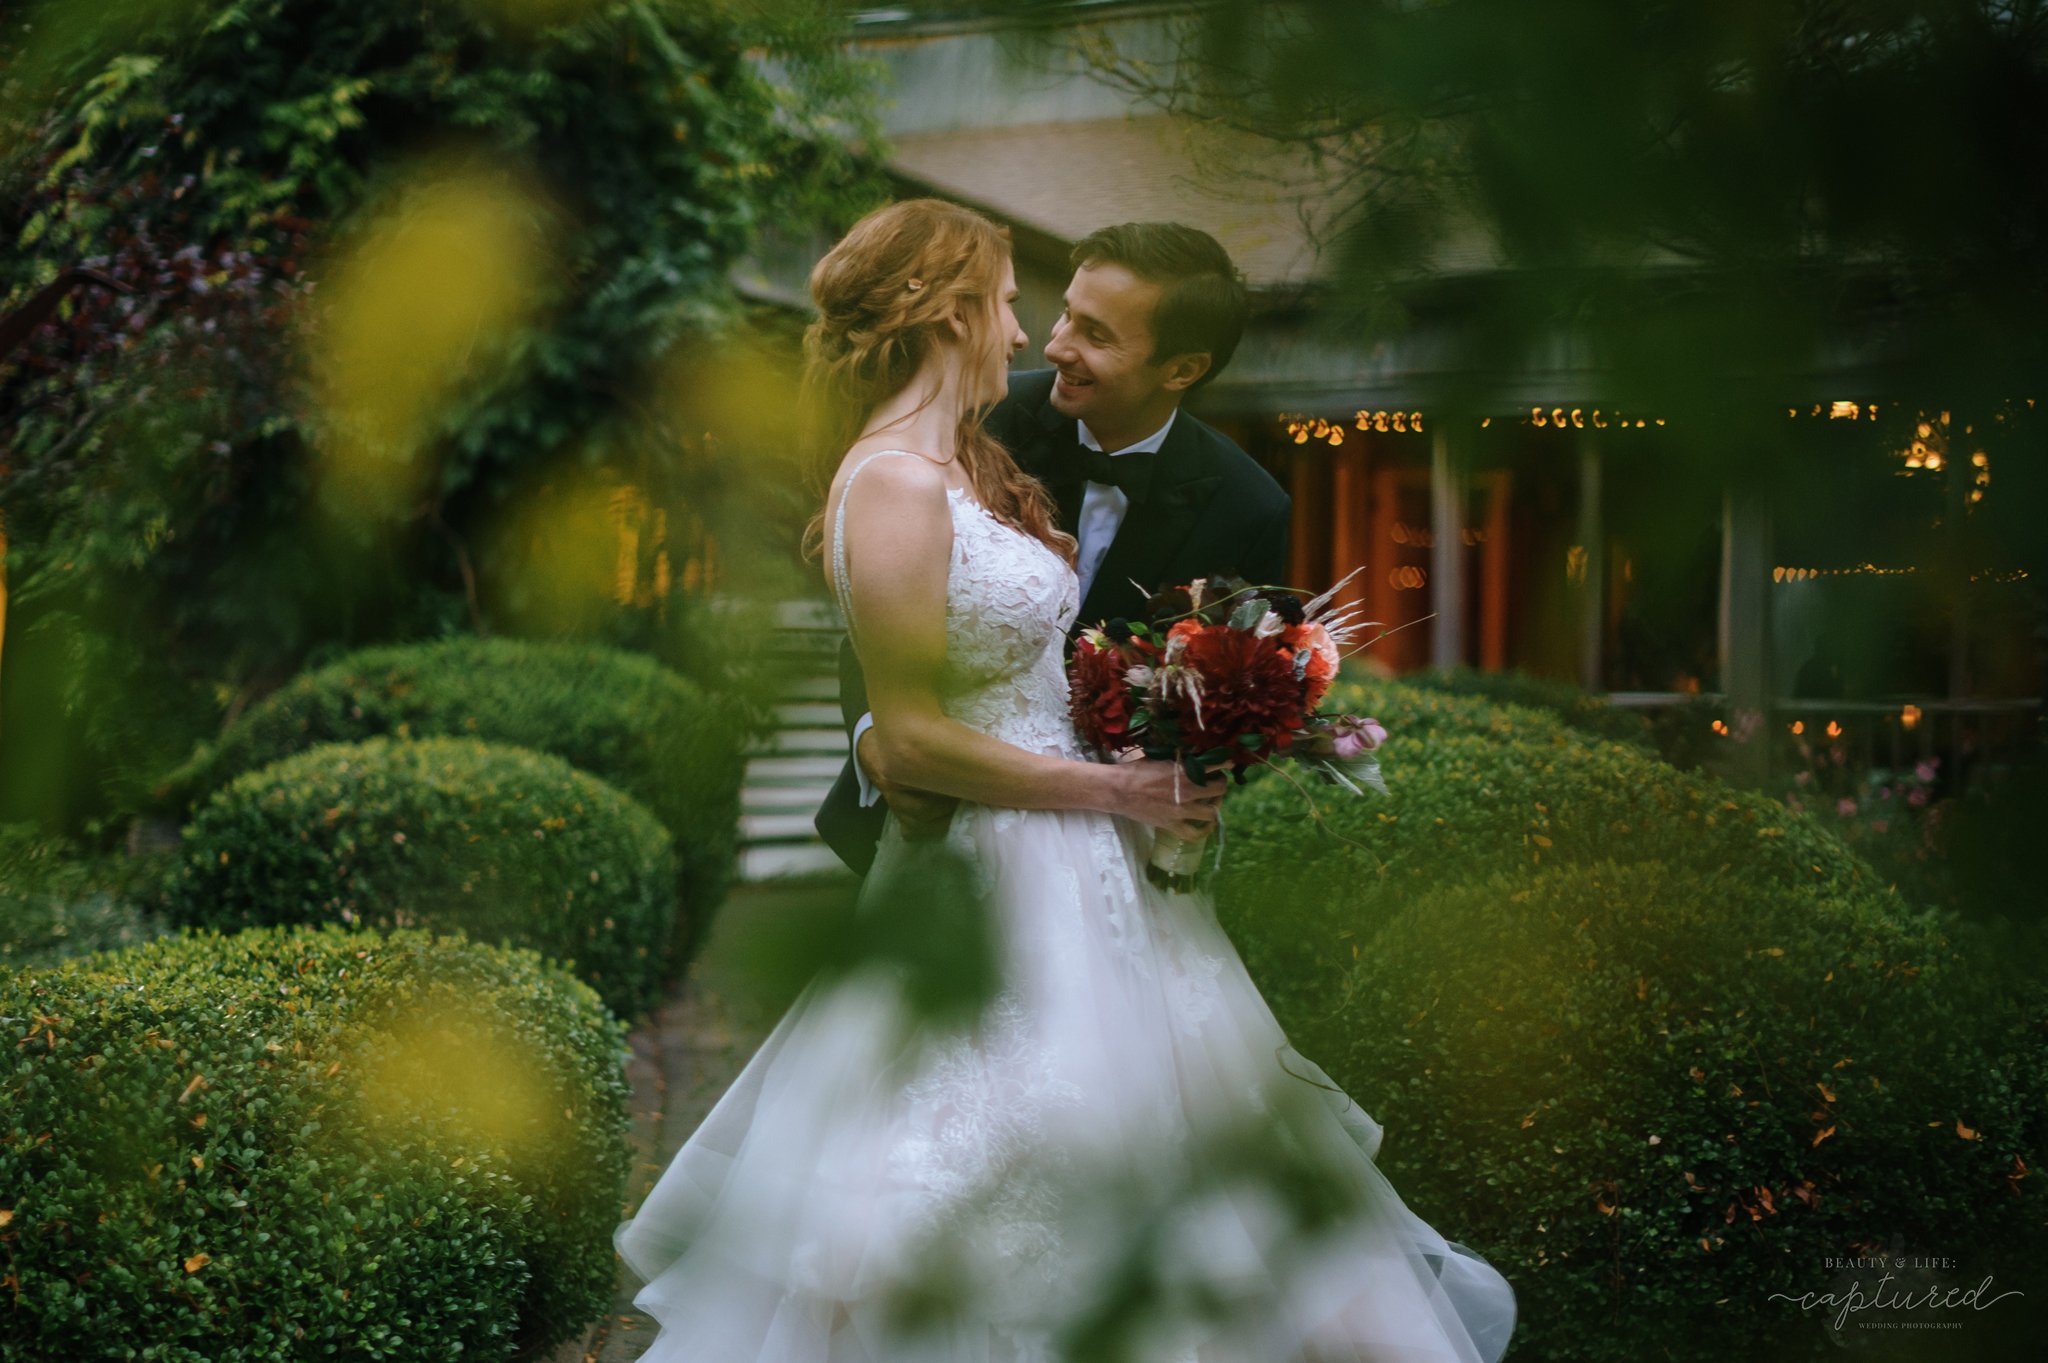 Beauty_and_Life_Captured_Jacquelyn_and_Adrian_Wedding-912.jpg